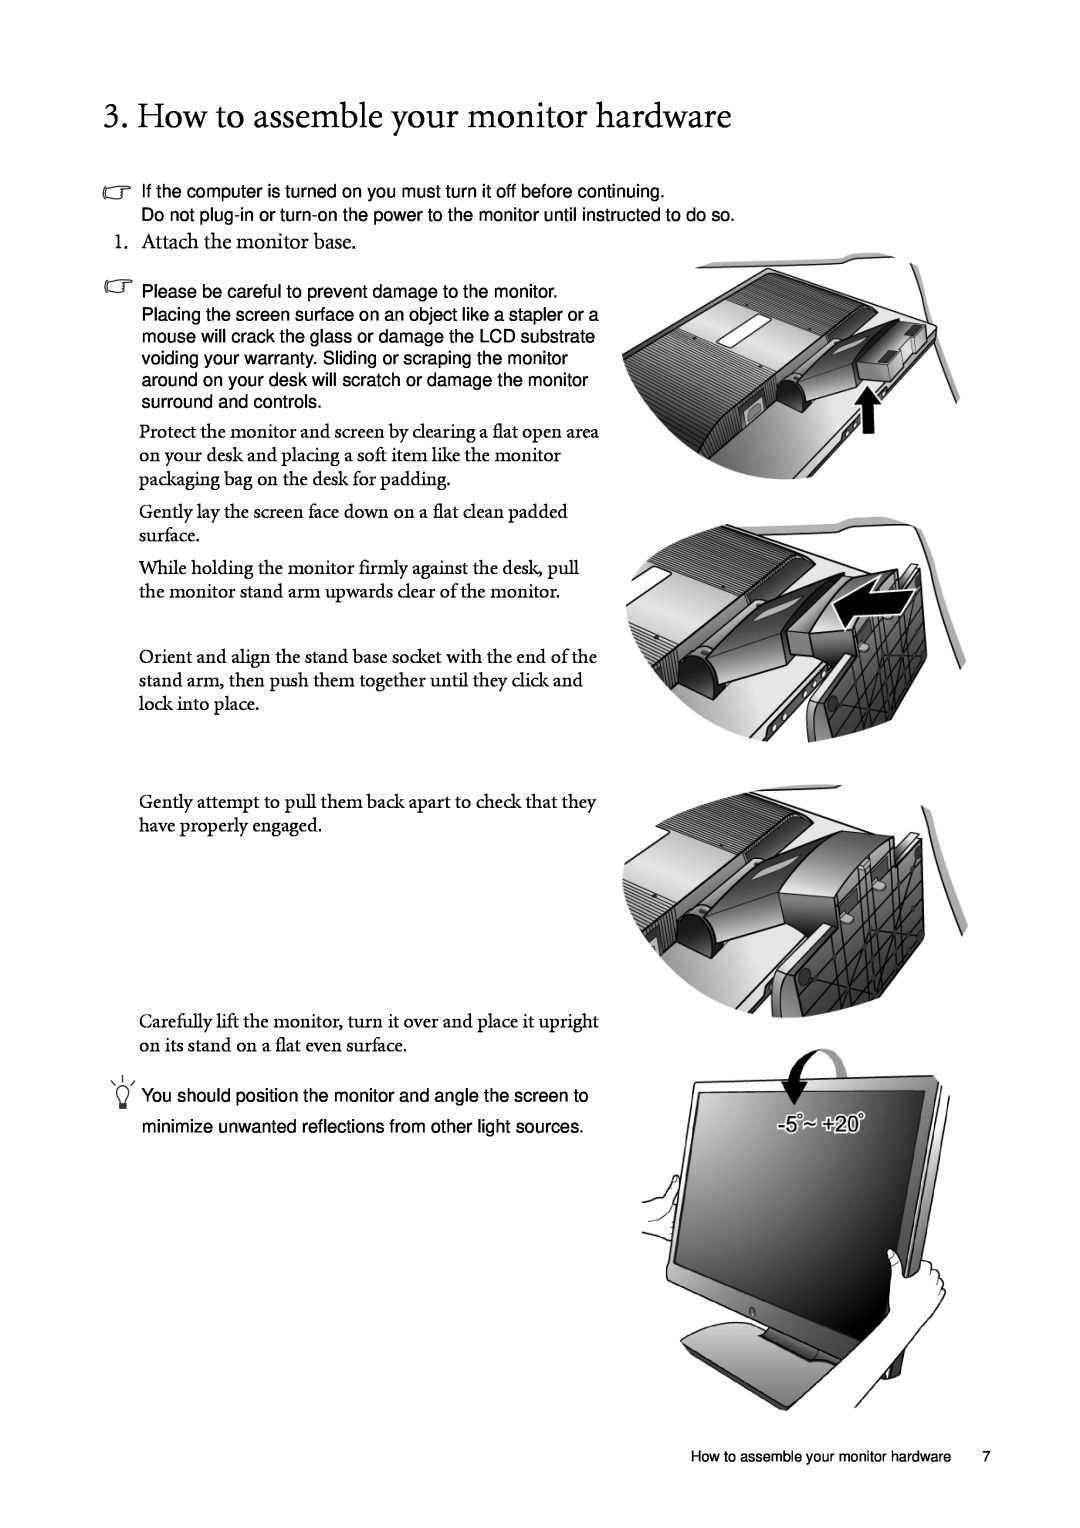 BenQ G2400WA G700, G2000WA, G900WA, G900A, G700A user manual How to assemble your monitor hardware, Attach the monitor base 